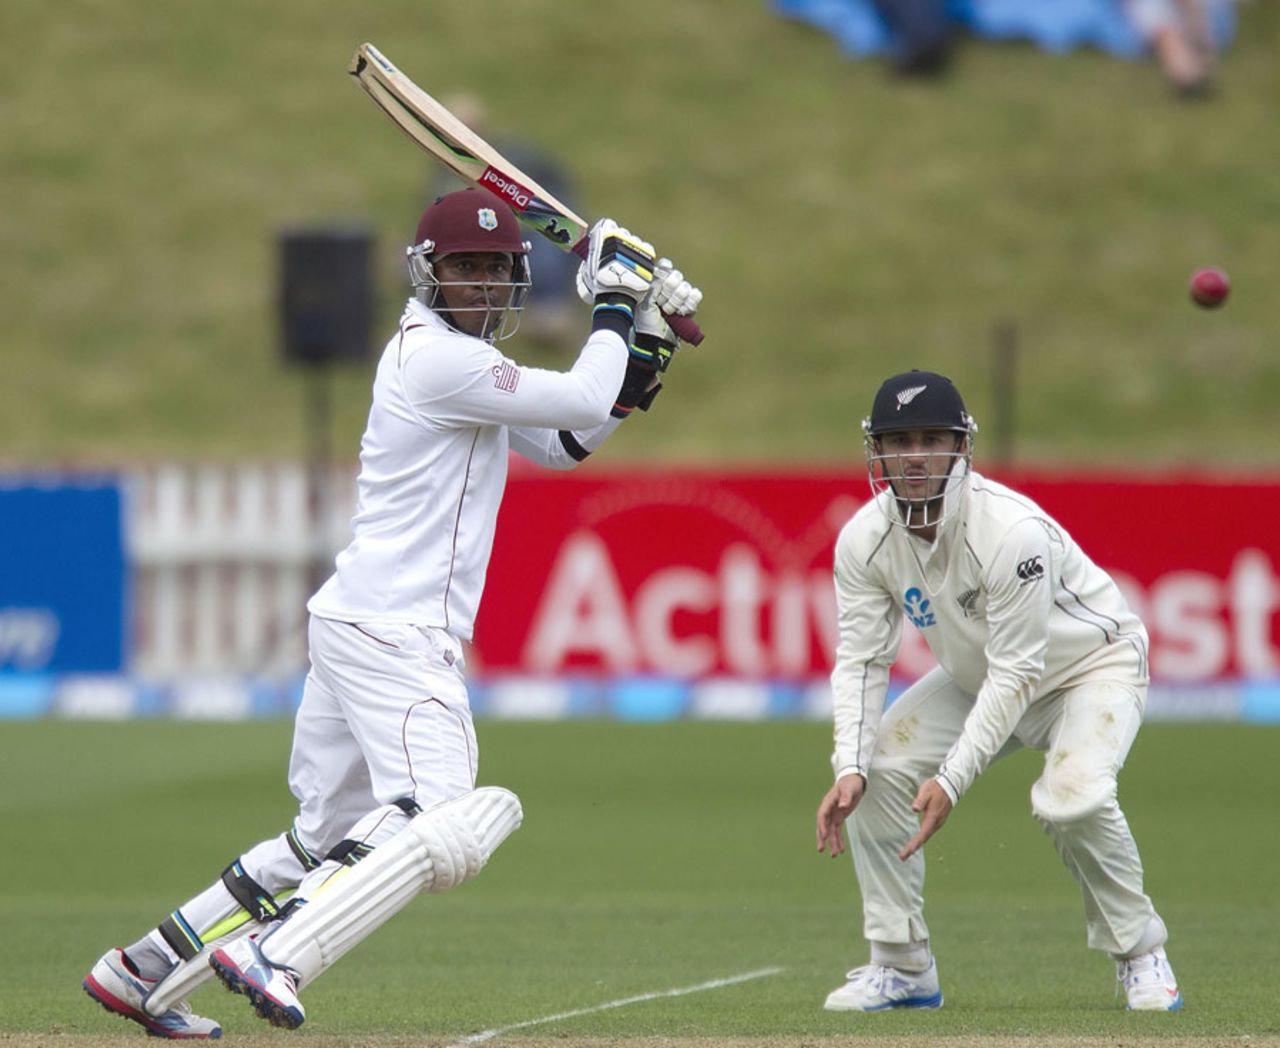 Marlon Samuels plays the ball to the off side during his unbeaten fifty, New Zealand v West Indies, 2nd Test, Wellington, 2nd day, December 12, 2013